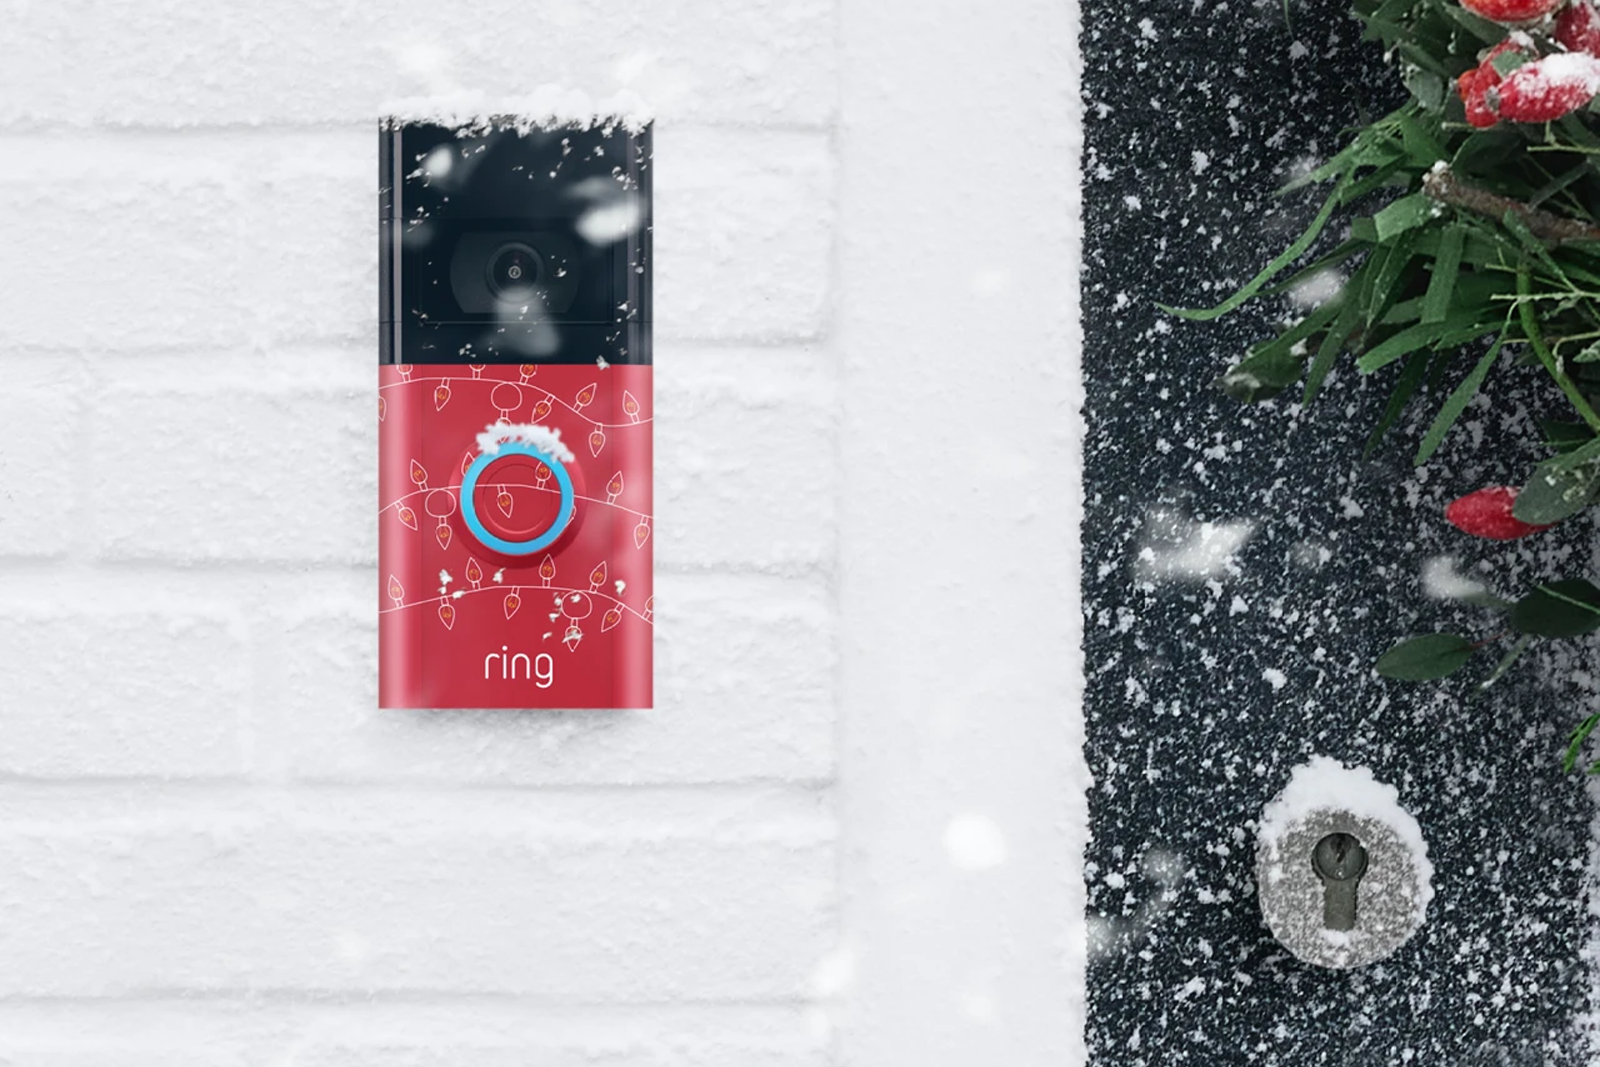 Ring's festive doorbell covers let you add more holiday fun to your doorstep photo 1